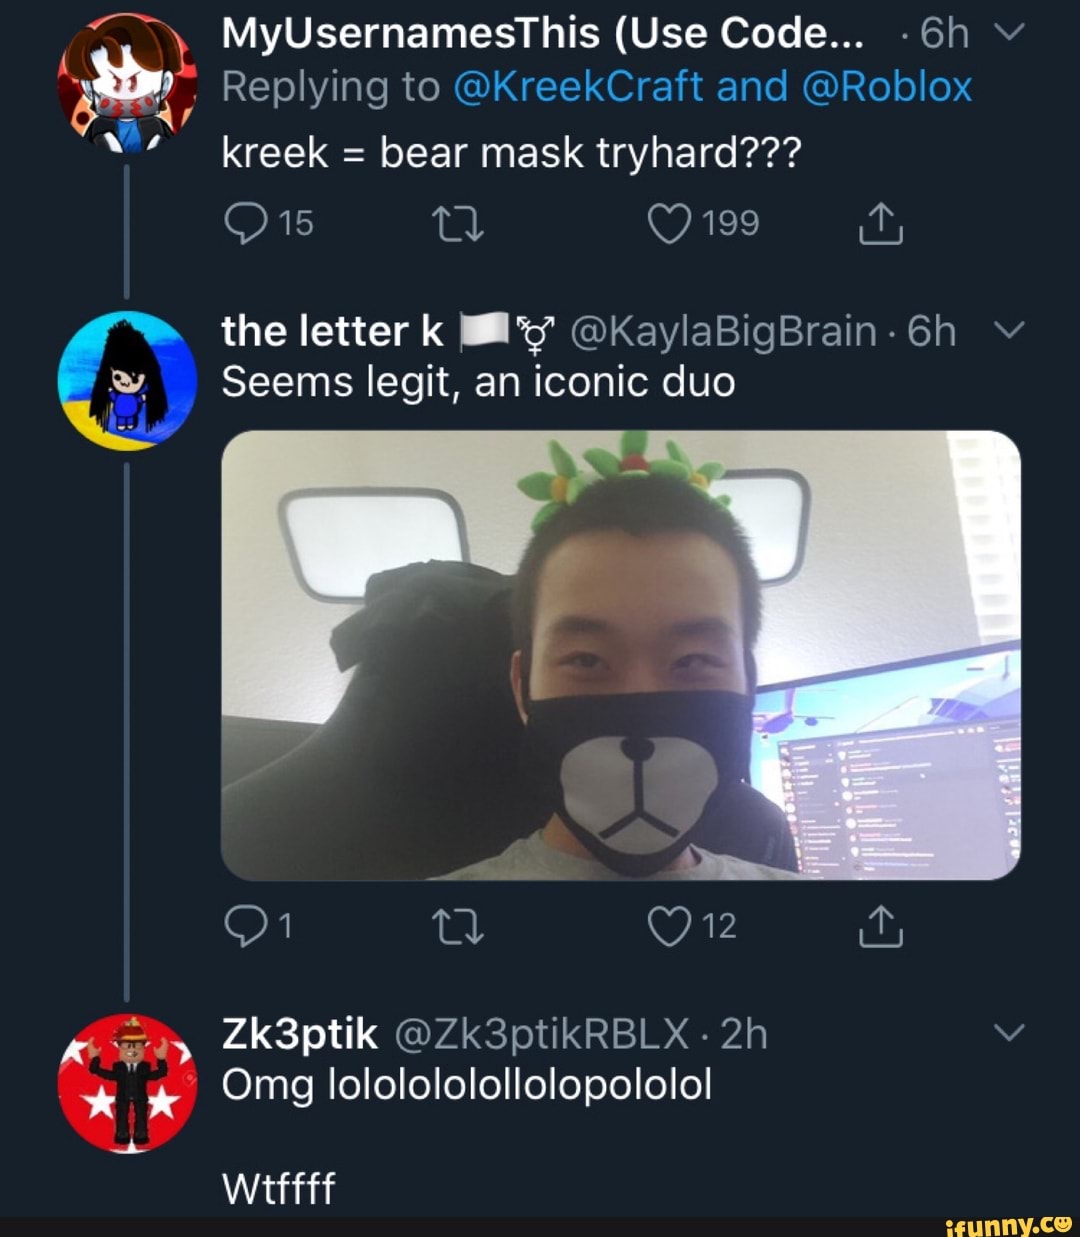 Myusernamesthis Use Code 6h Replying To Kreekcraft And Roblox Kreek Bear Mask Tryhard The Letter K By Okaylabigbrain 6h Y Seems Legit An Iconic Duo Omg Lololololollolopololo Ifunny - myusernamesthis roblox user